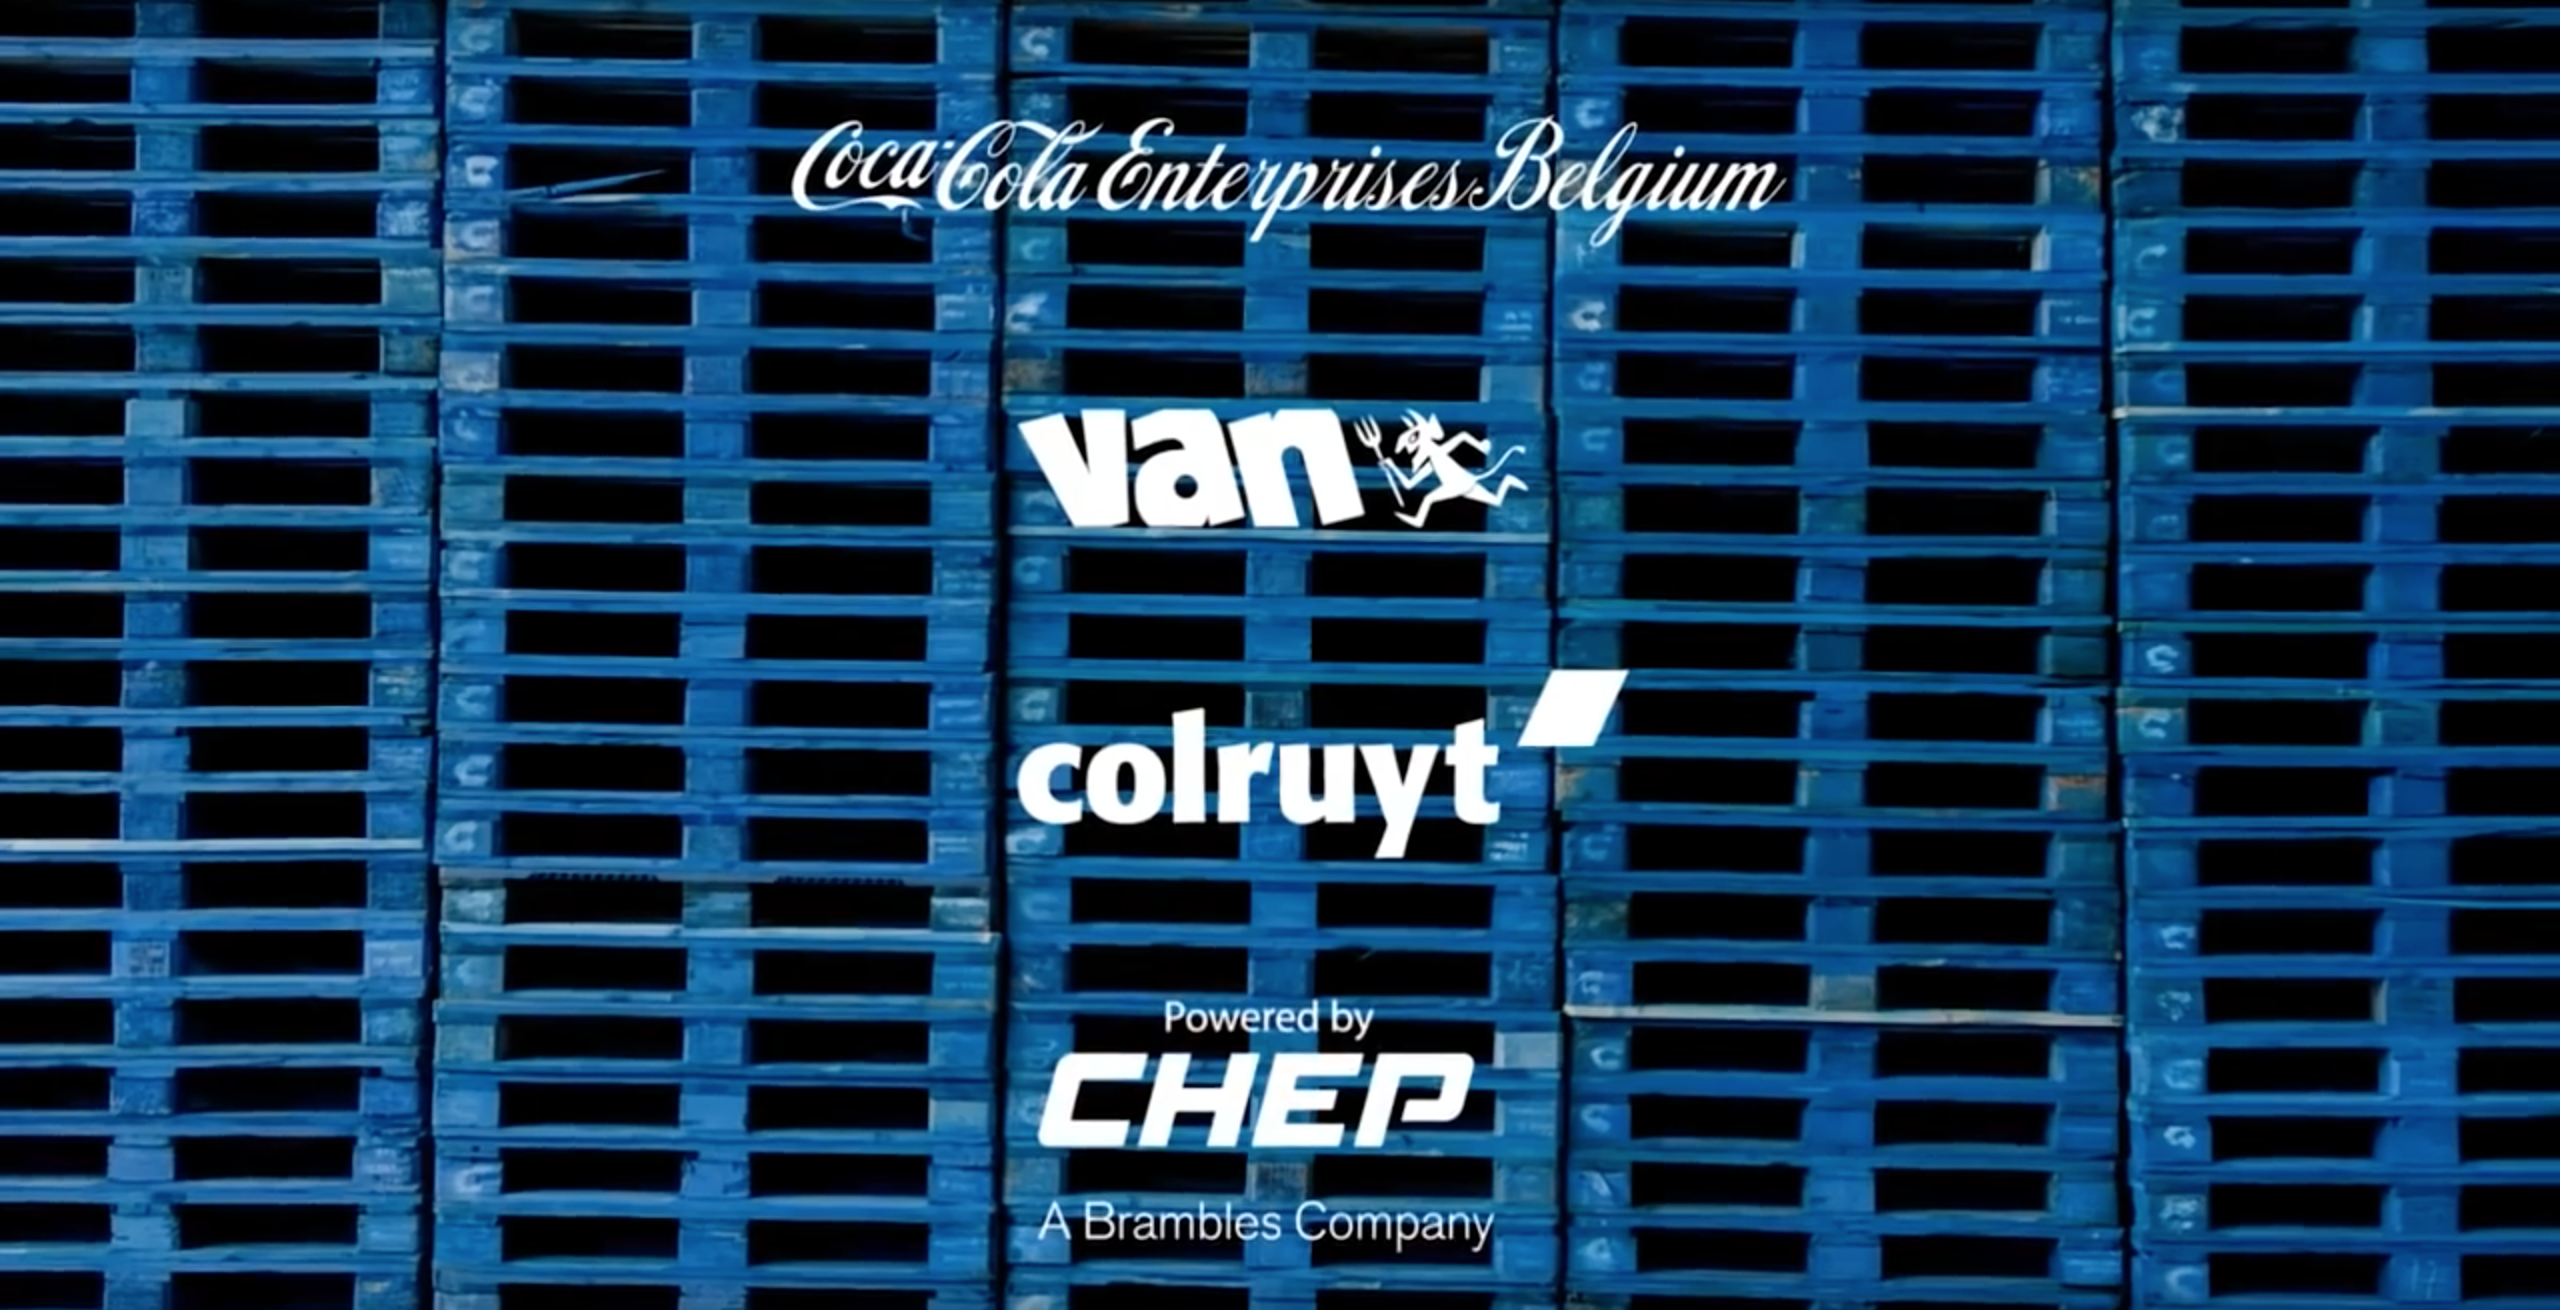 A video thumbnail image featuring a screen capture from the 'Supply-chain collaboration' video. The screen capture consists of an close-up shot of stacks of blue CHEP pallets with 4 white logos overlayed on top of which. These logos include the Coca Cola Enterprises Belgium logo, Van, Colruyt, and the powered but CHEP logo.